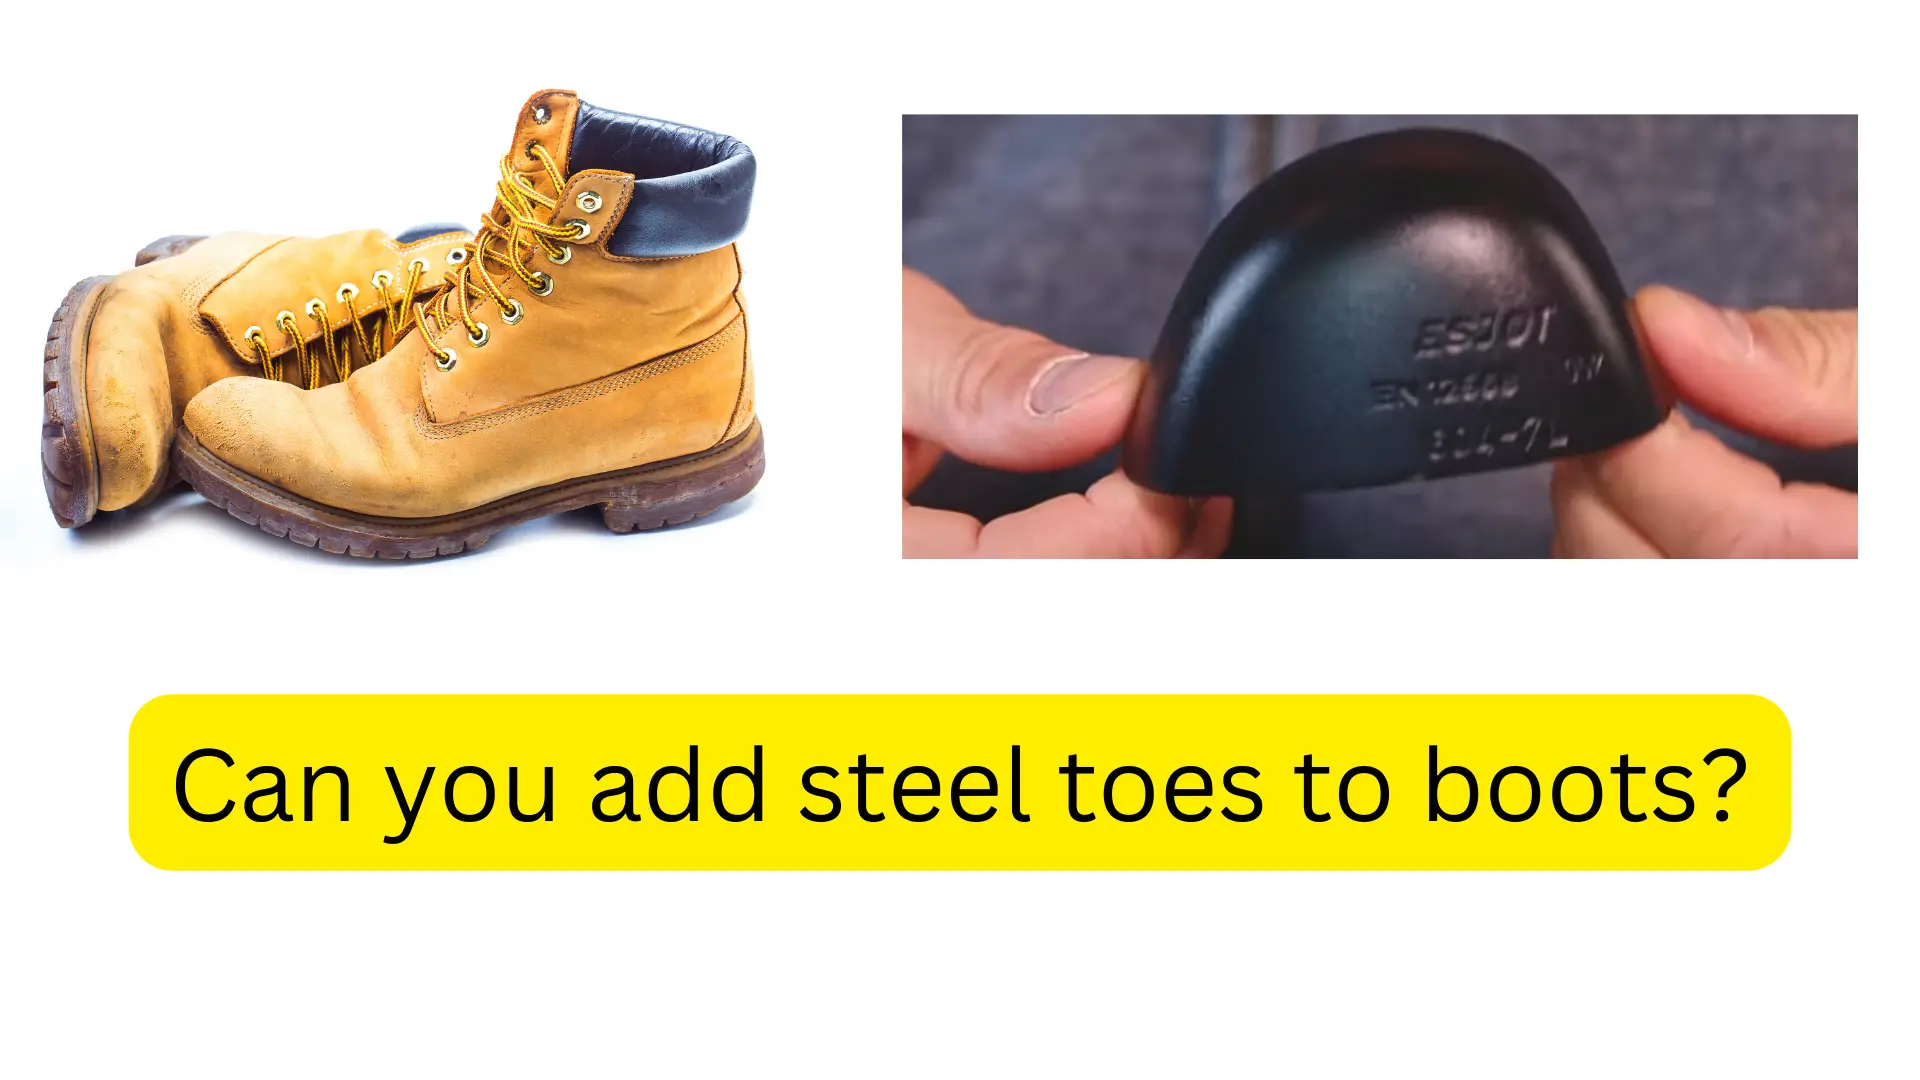 Can you add steel toes to boots?